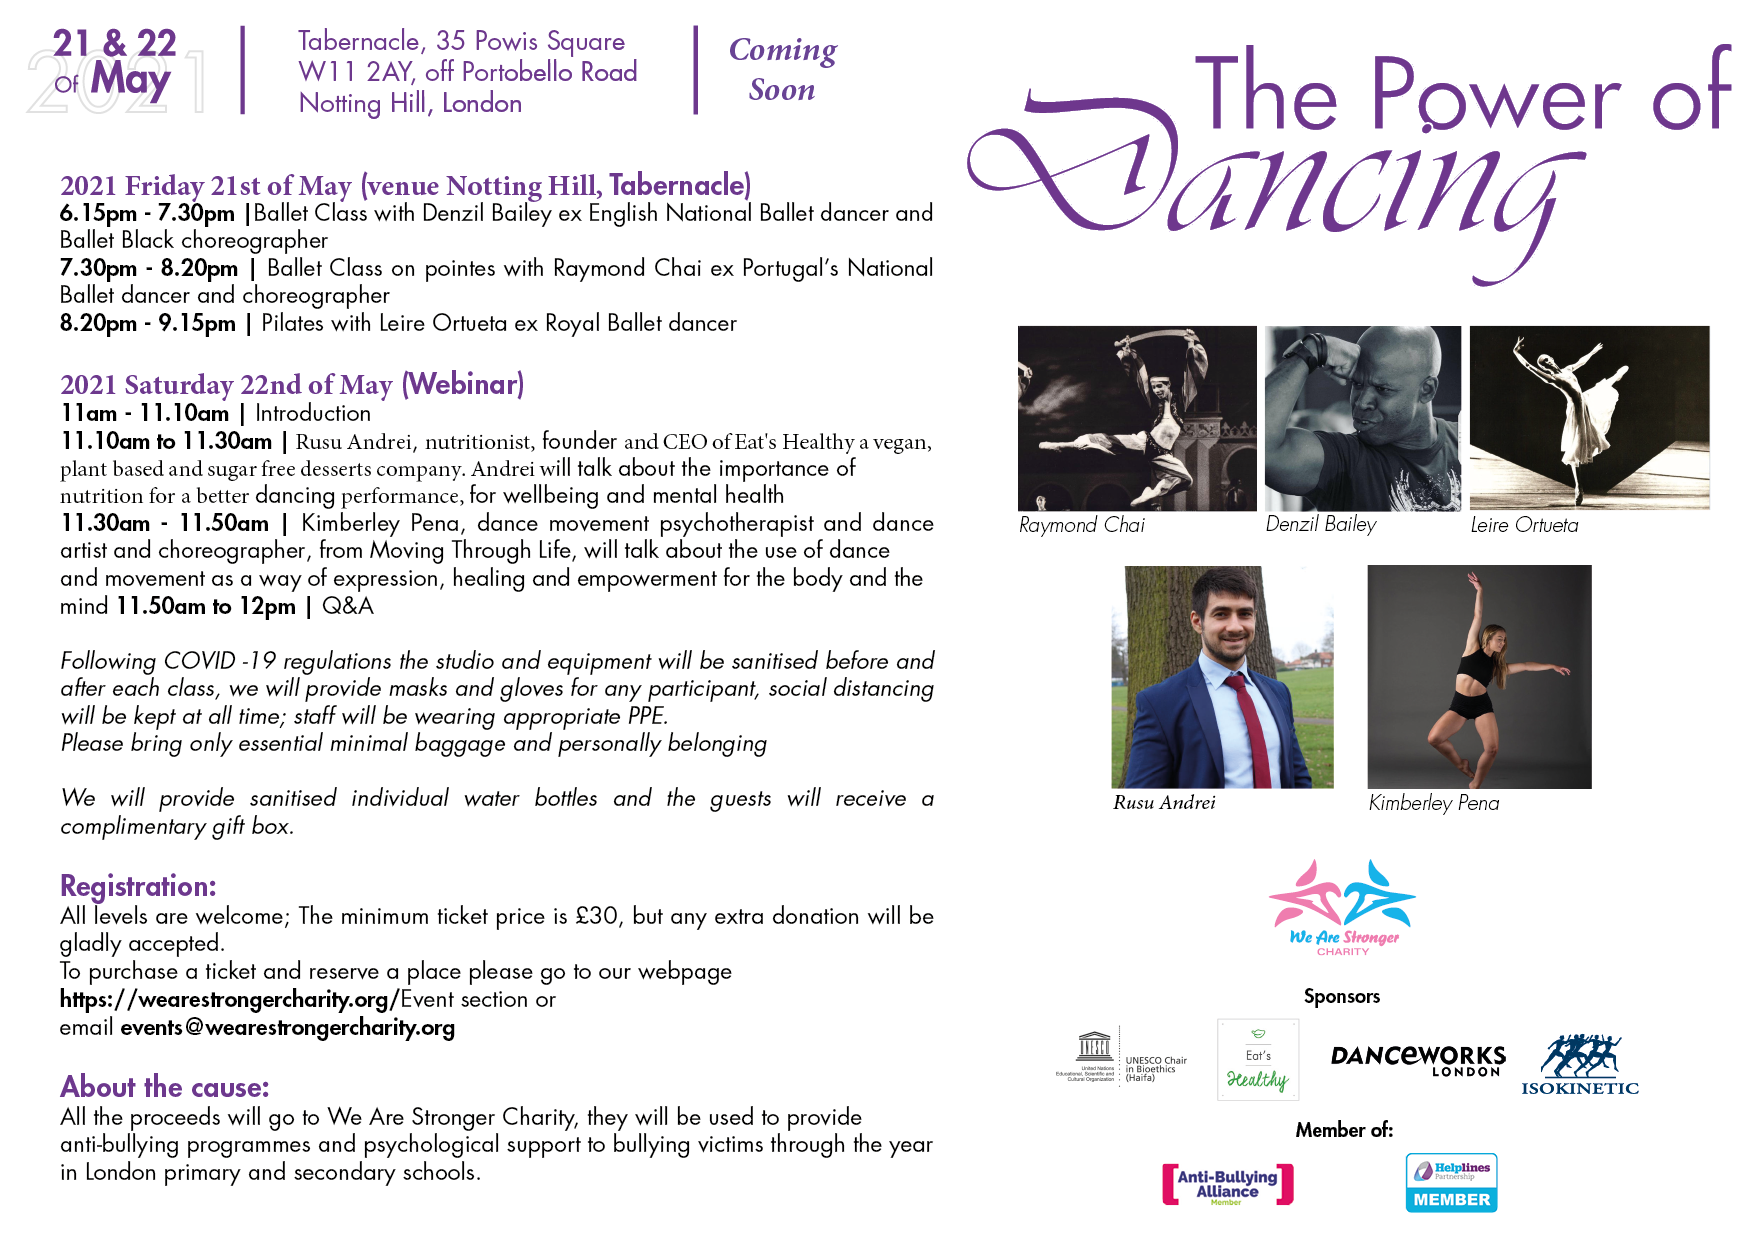 https://static.wearestrongercharity.org/images/events/The_power_of_dancing_-_flyer_web.jpeg